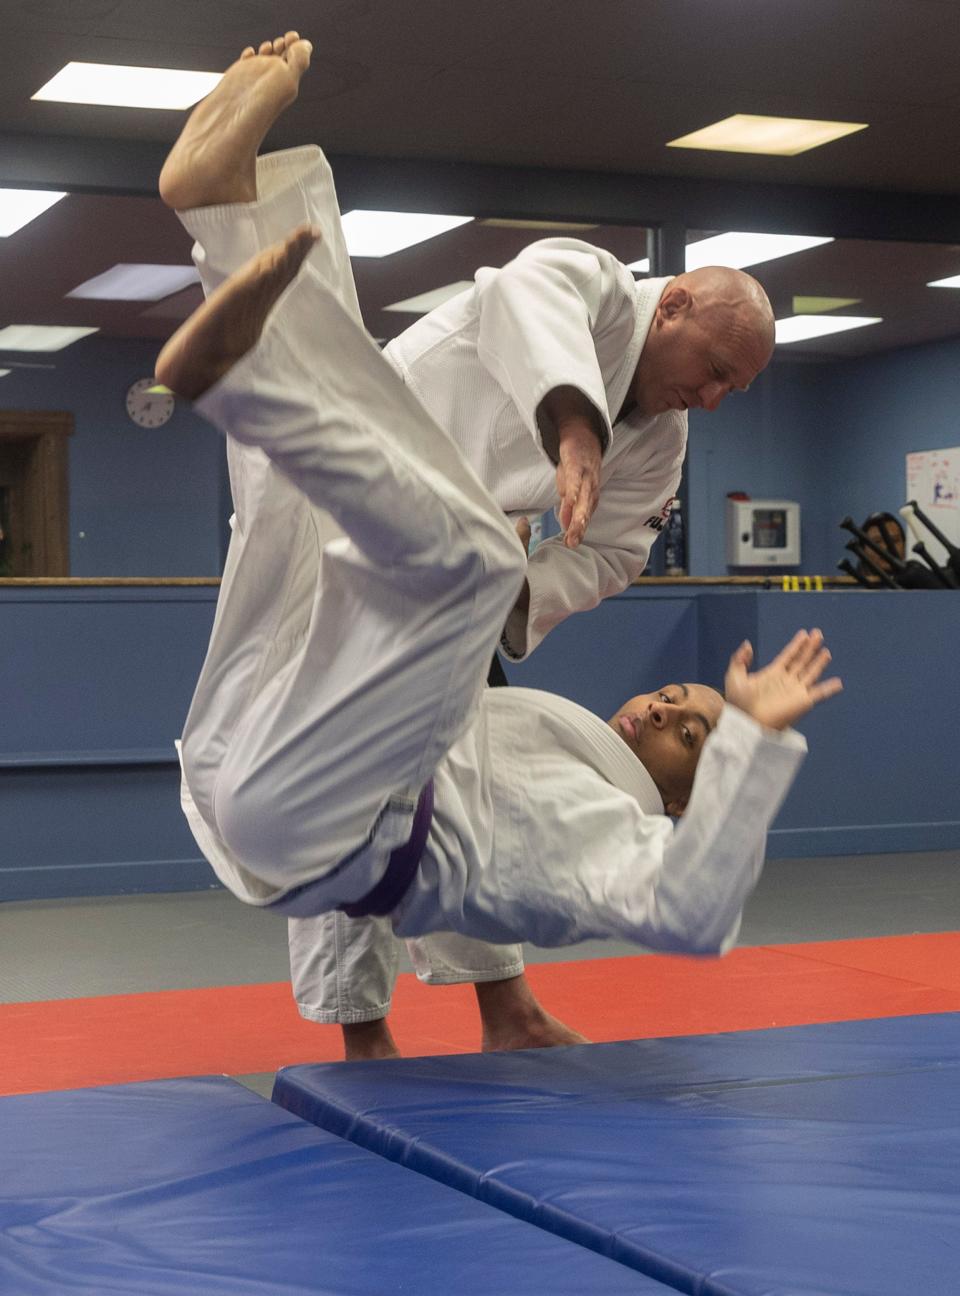 Jason David Tabor demonstrates a hip throw with Chris Albert for a class of 10- to 13-year-olds at Fair Haven Martial Arts in Fair Haven, which provides martial arts and fitness training for its customers. Wednesday, Feb. 1, 2023